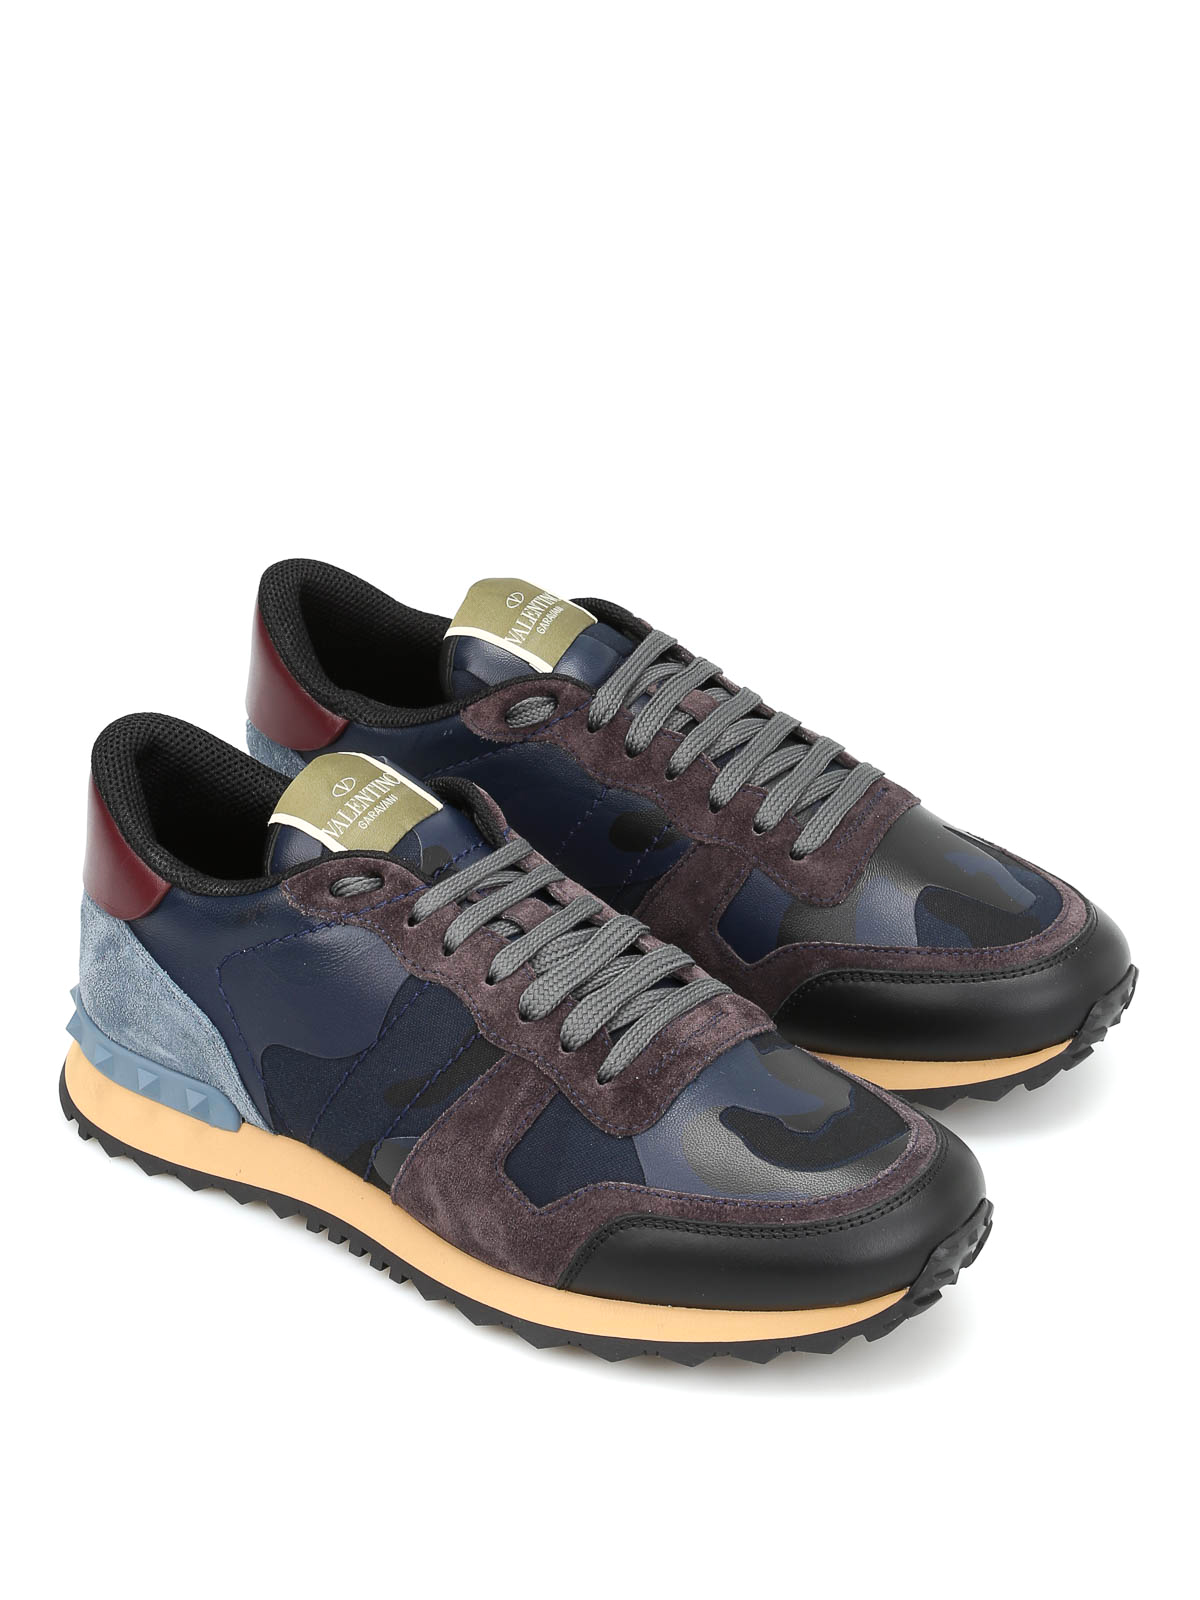 Valentino - Rockrunner sneakers - trainers - MY2S0723TCCM14